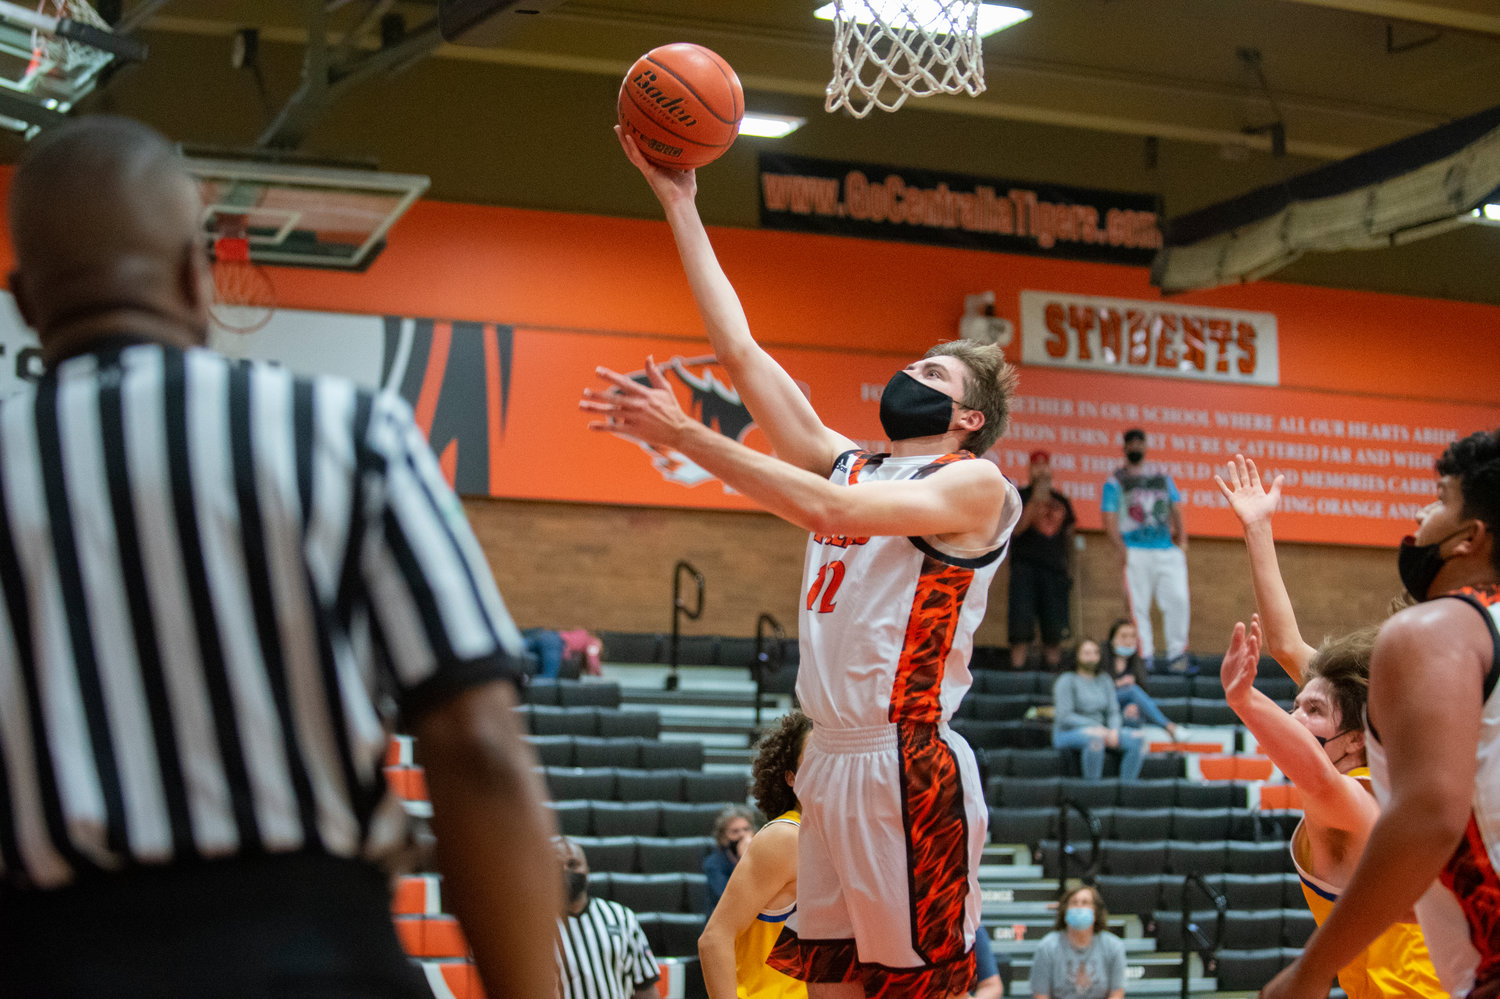 Centralia junior Landon Kaut (12) soars for two points against Rochester at home on Wednesday.